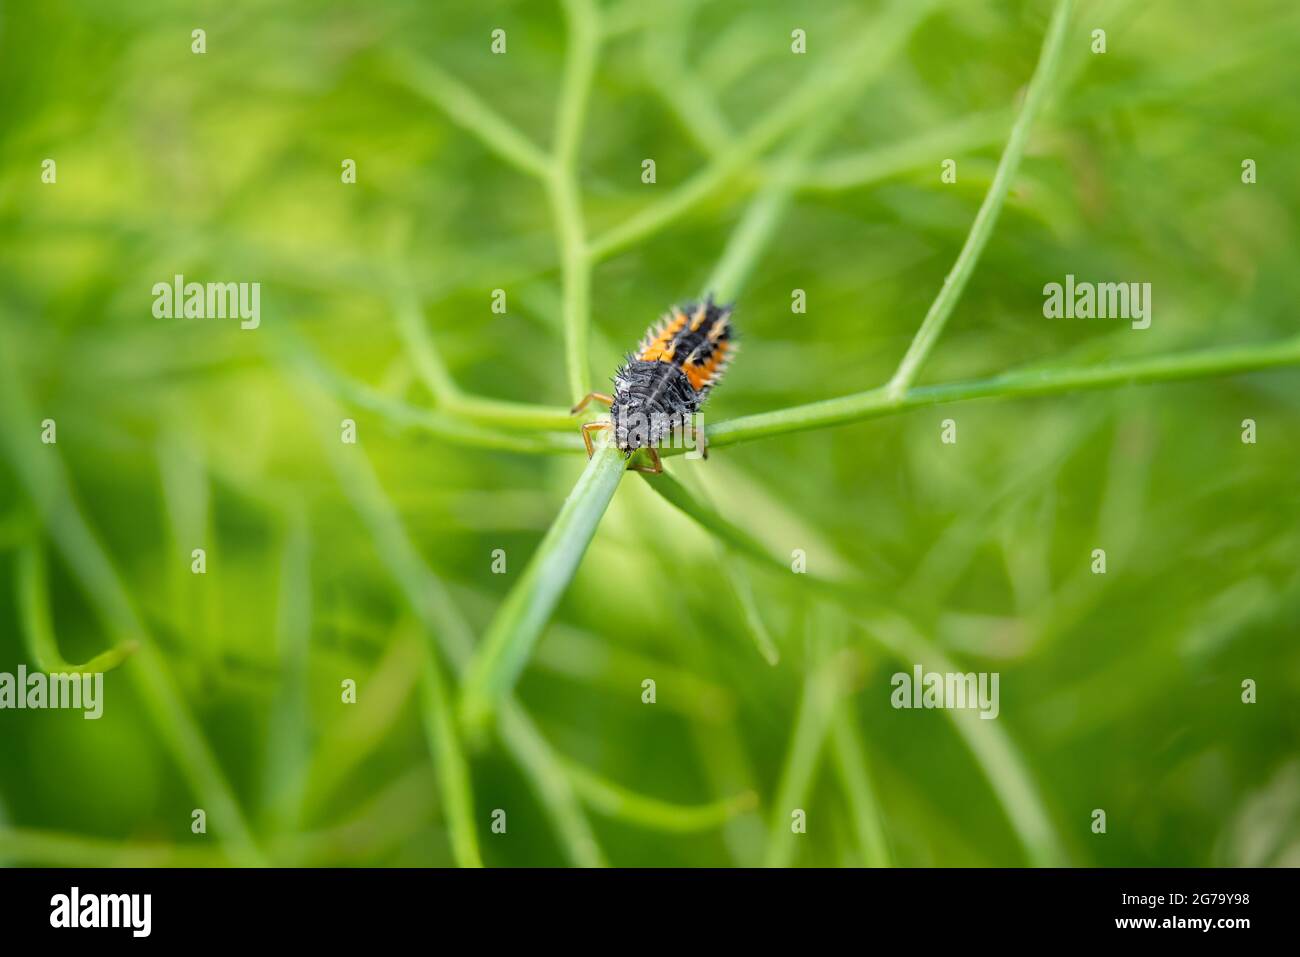 Ladybug larvae or nymph crawling on a fennel plant. Black orange creepy looking bug beneficial for any garden as it consumes or eats aphids and other Stock Photo